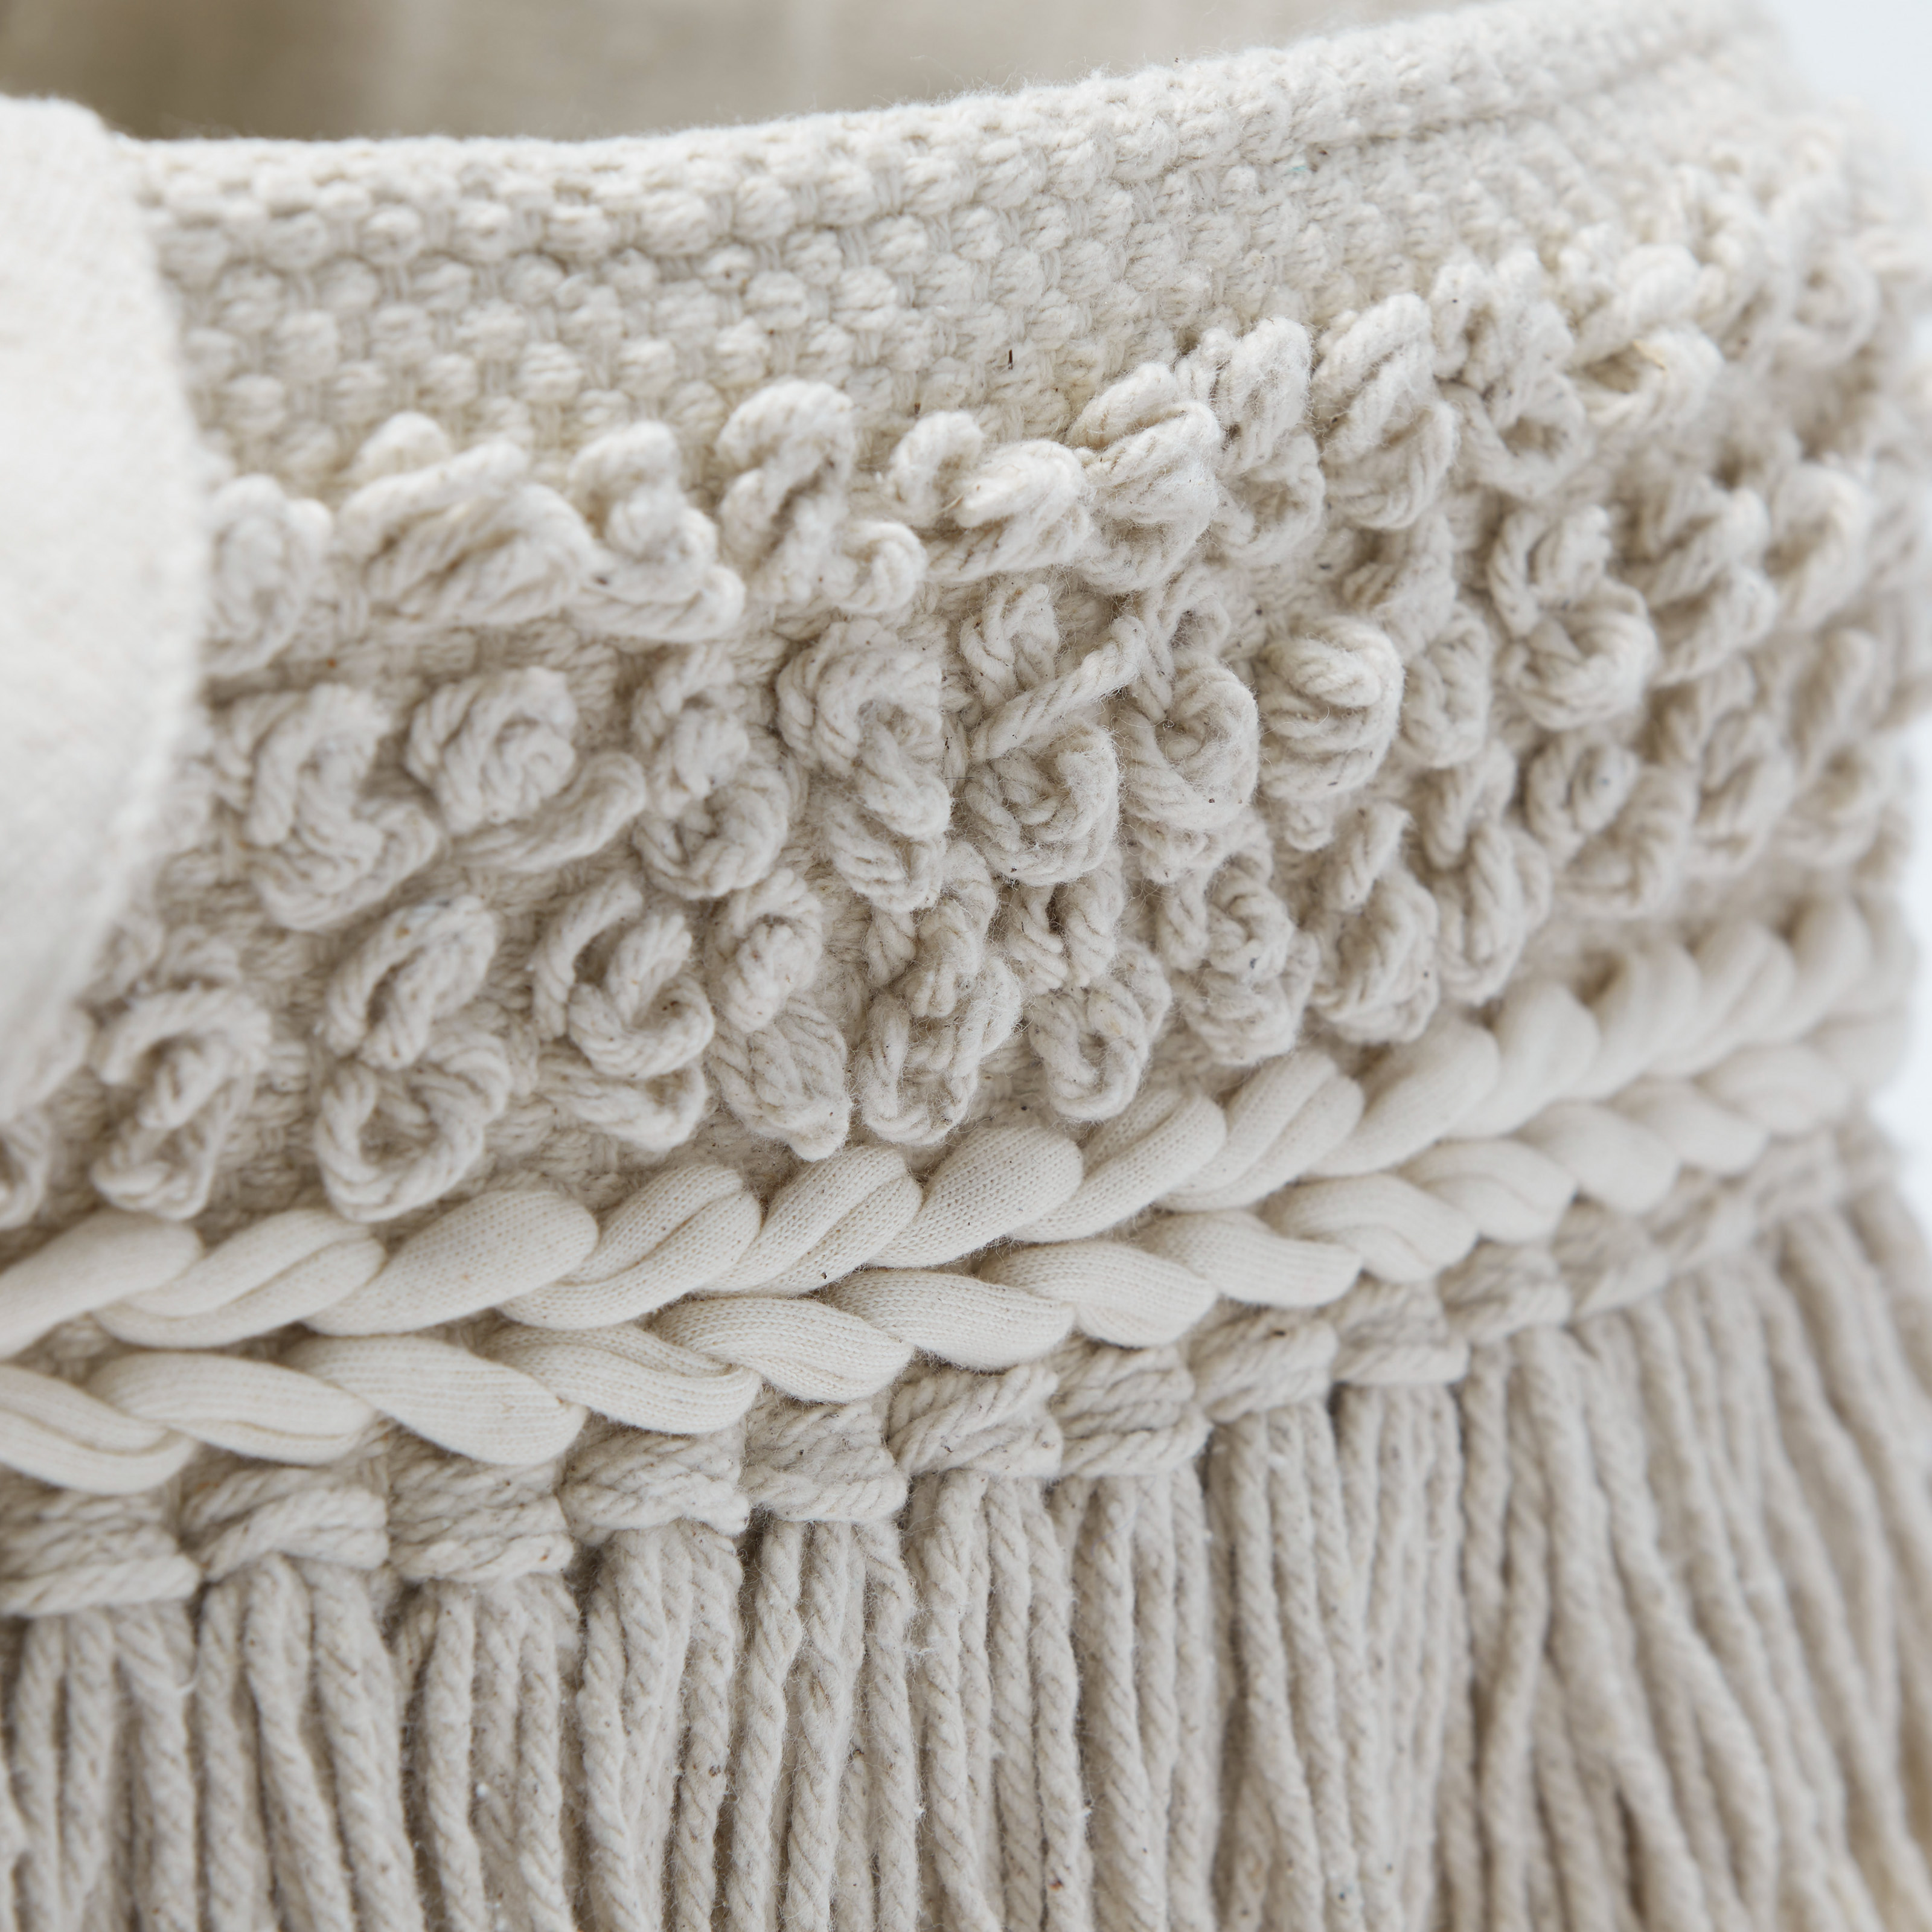 Hand Woven Macrame 3 Piece Basket Set, Natural by Drew Barrymore Flower Home - image 5 of 8